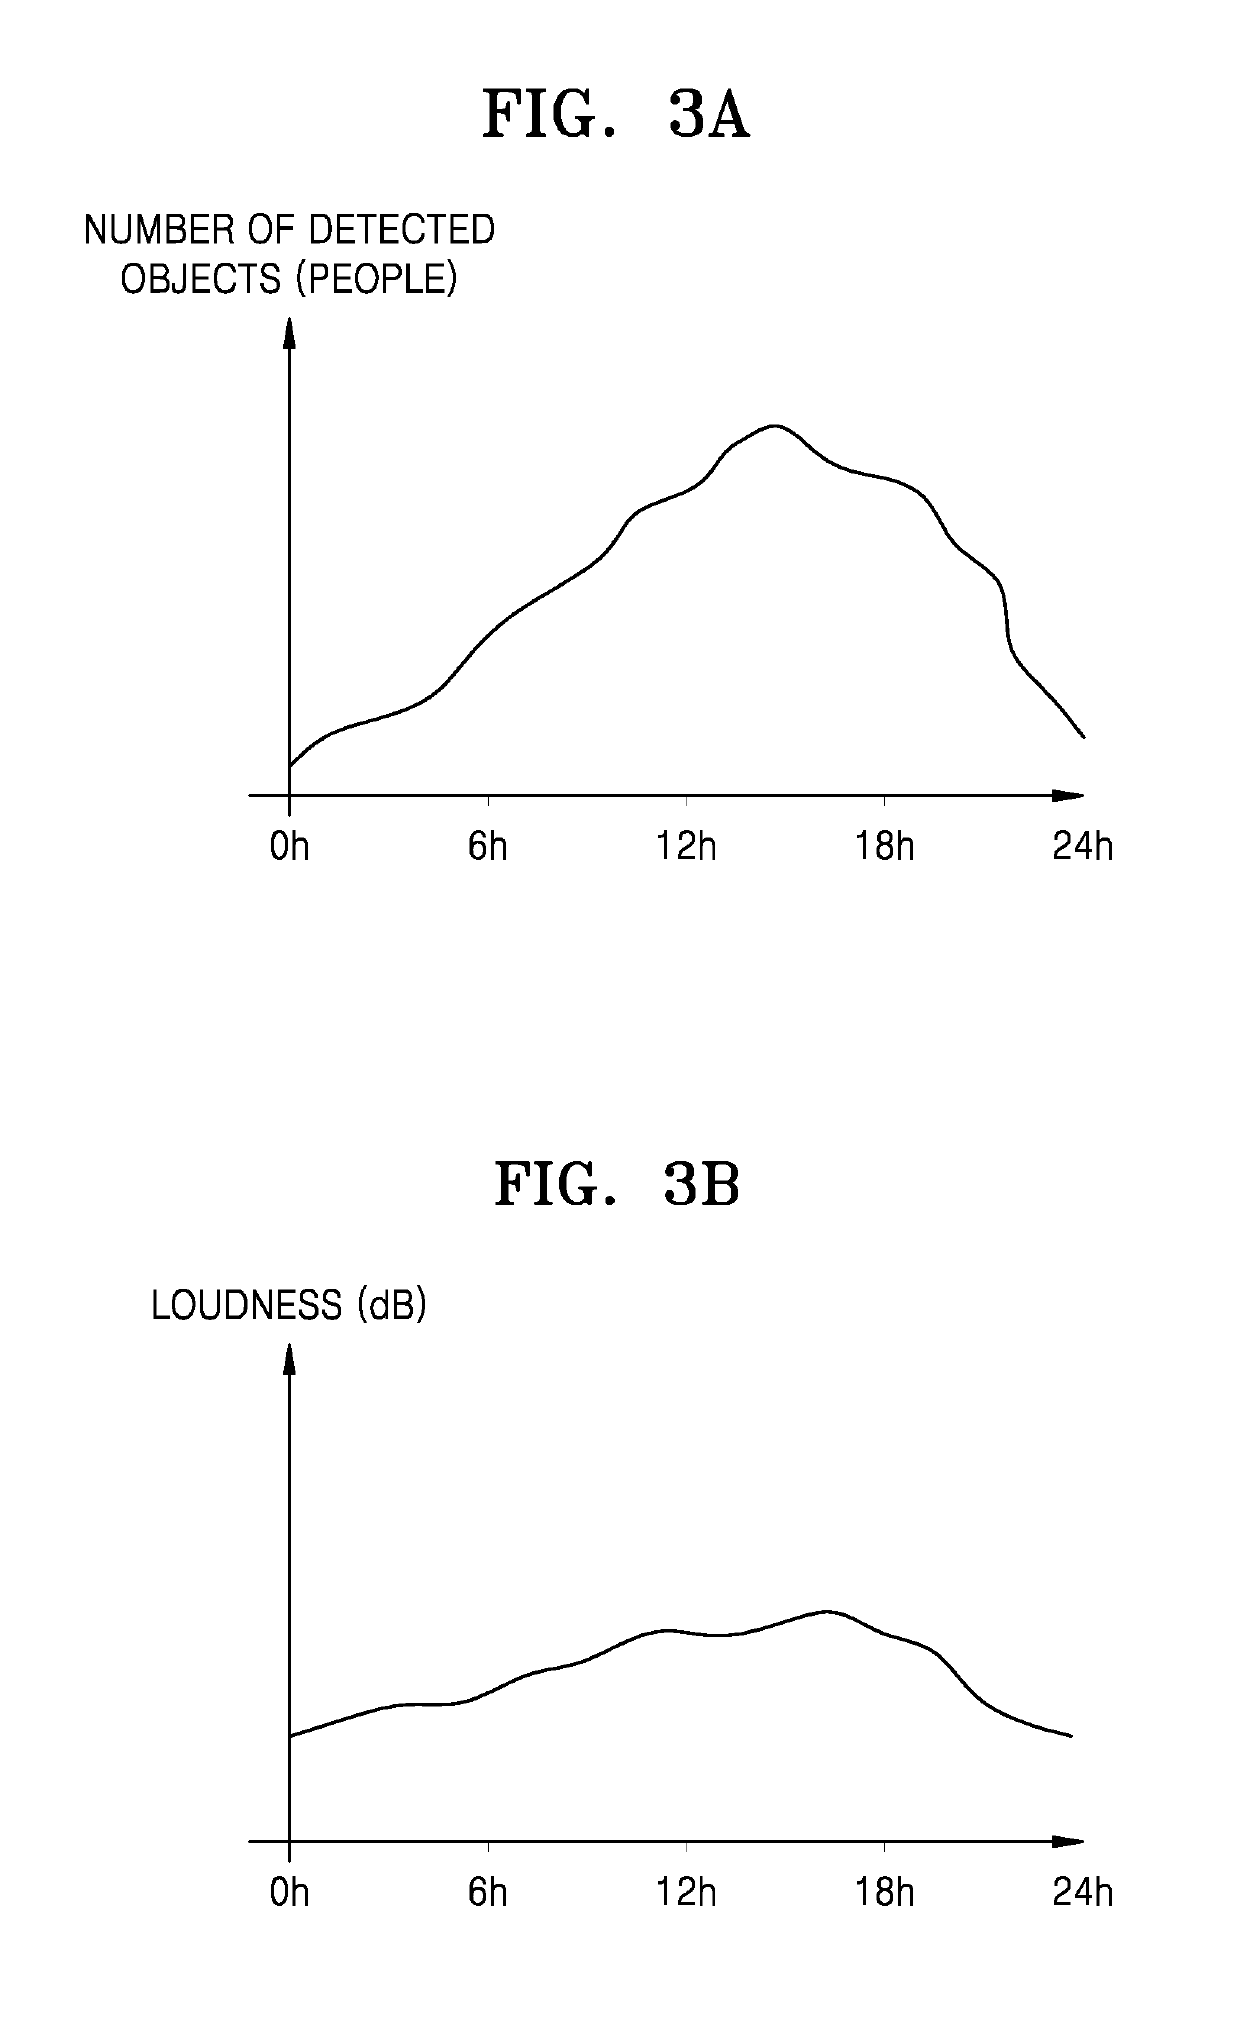 System and method for providing surveillance data